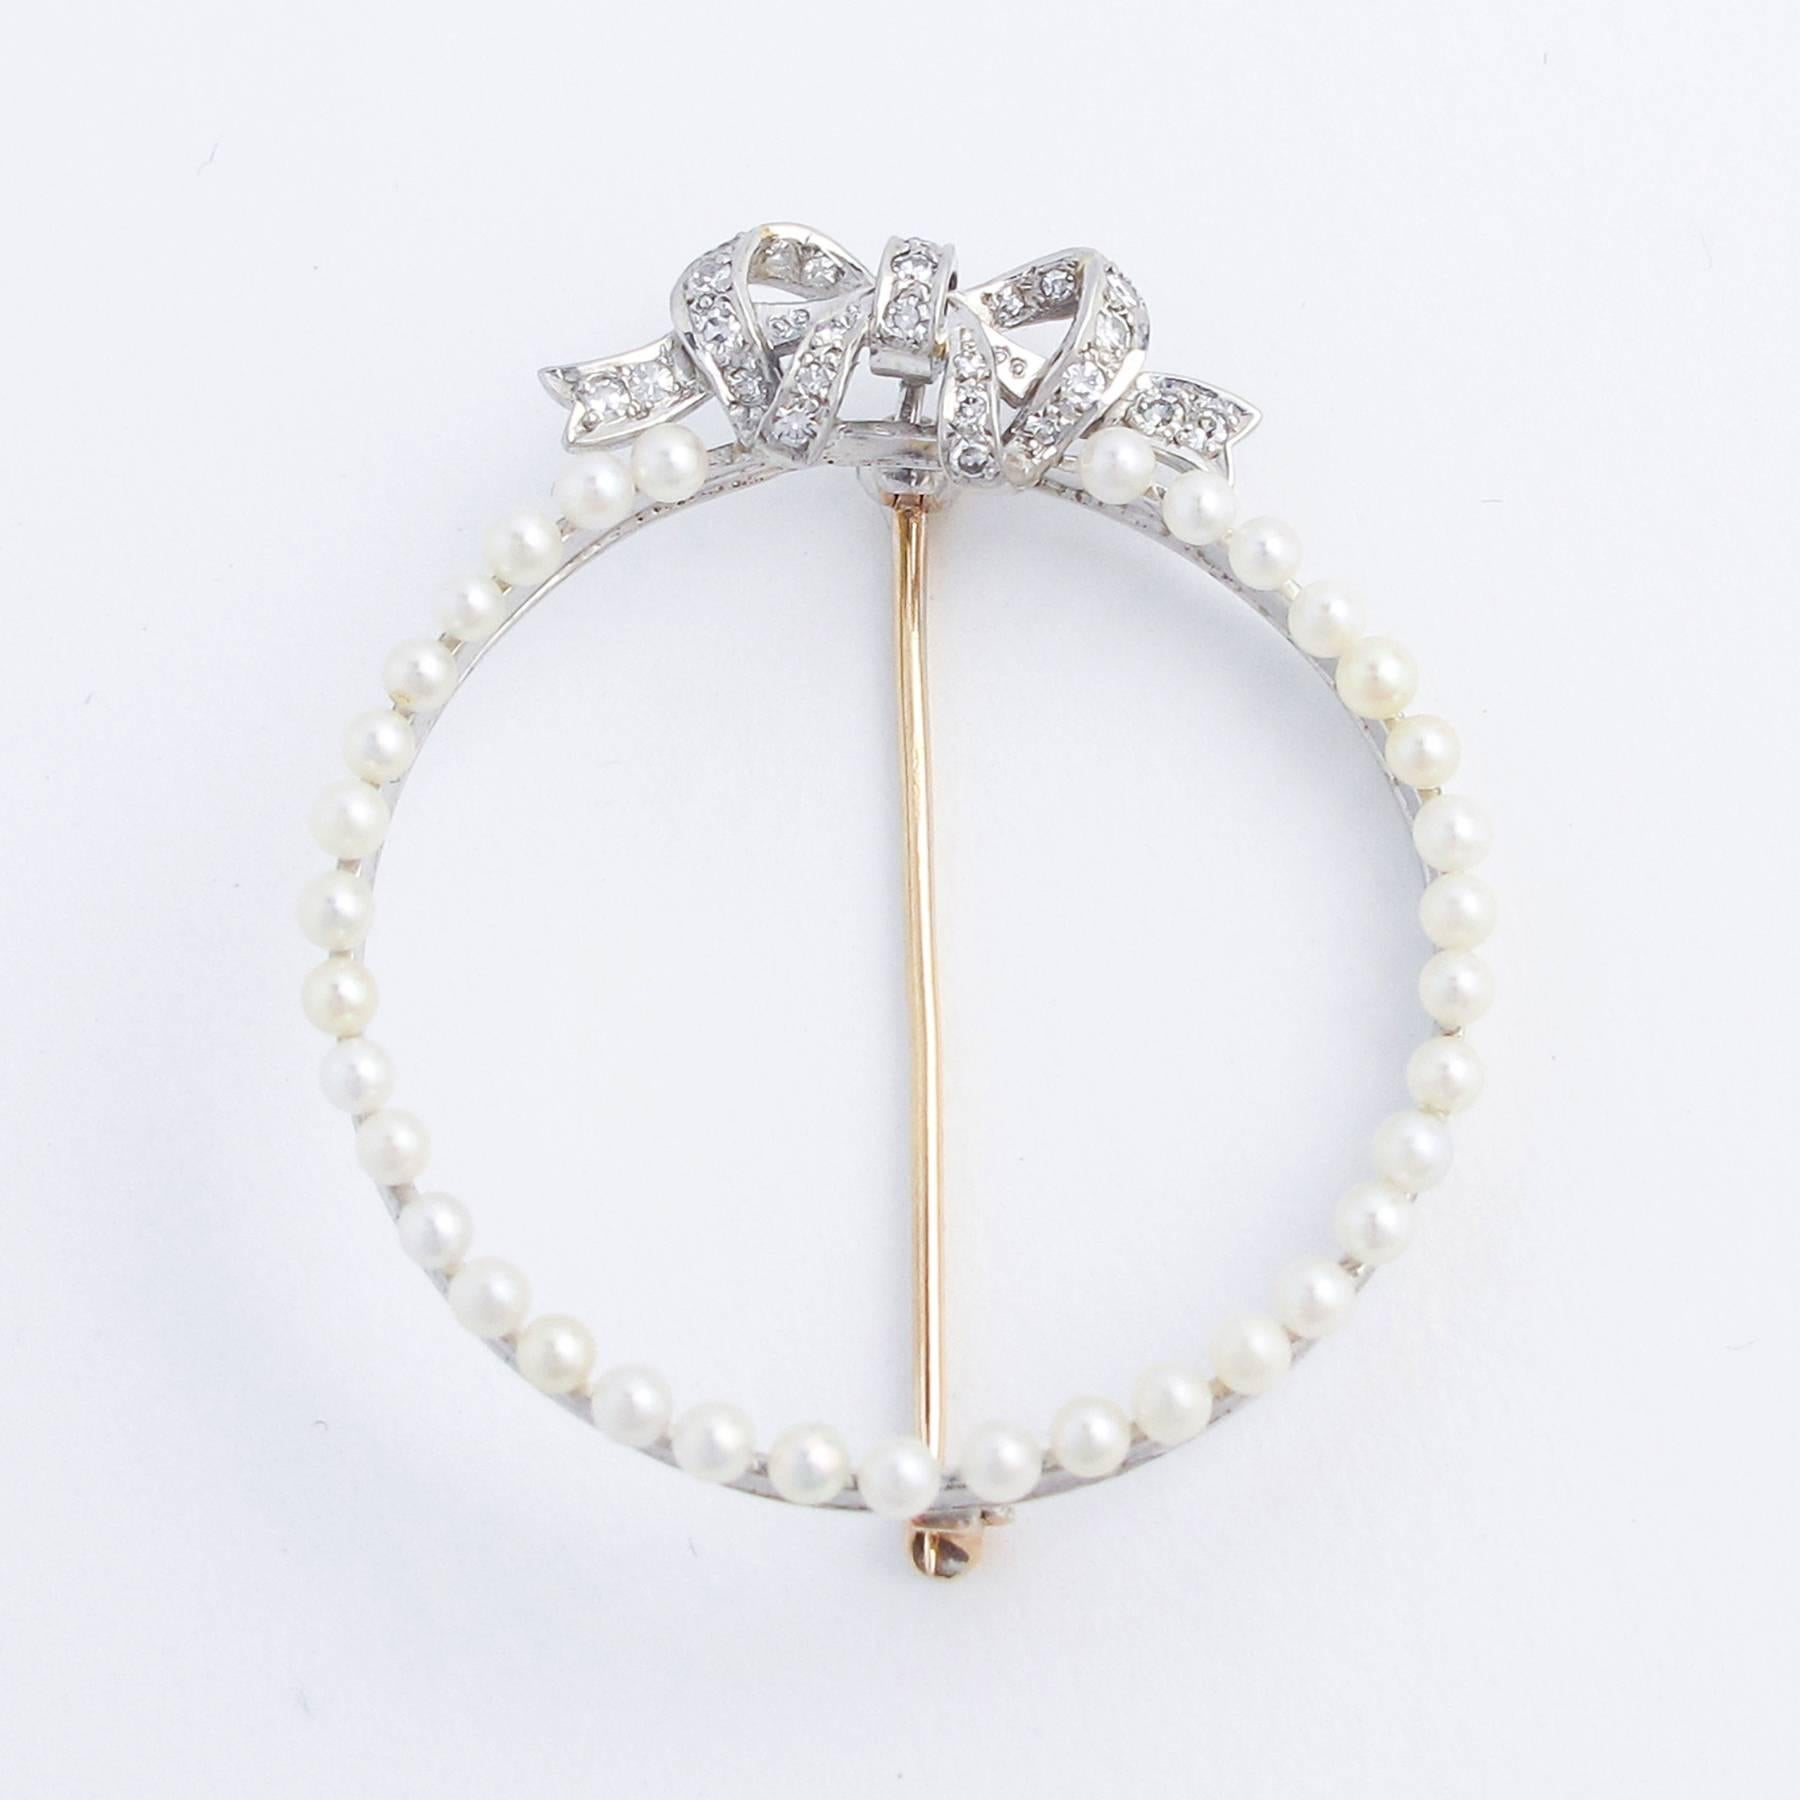 Natural Silver Gulf Pearls are peg set in a circle and tied with a pretty Diamond set Bow comprised of 35 Diamonds.

Very wearable at 1.75 inches across, and light weight at 5 grams. Typical of the period, the White Gold is 18K while the broaching